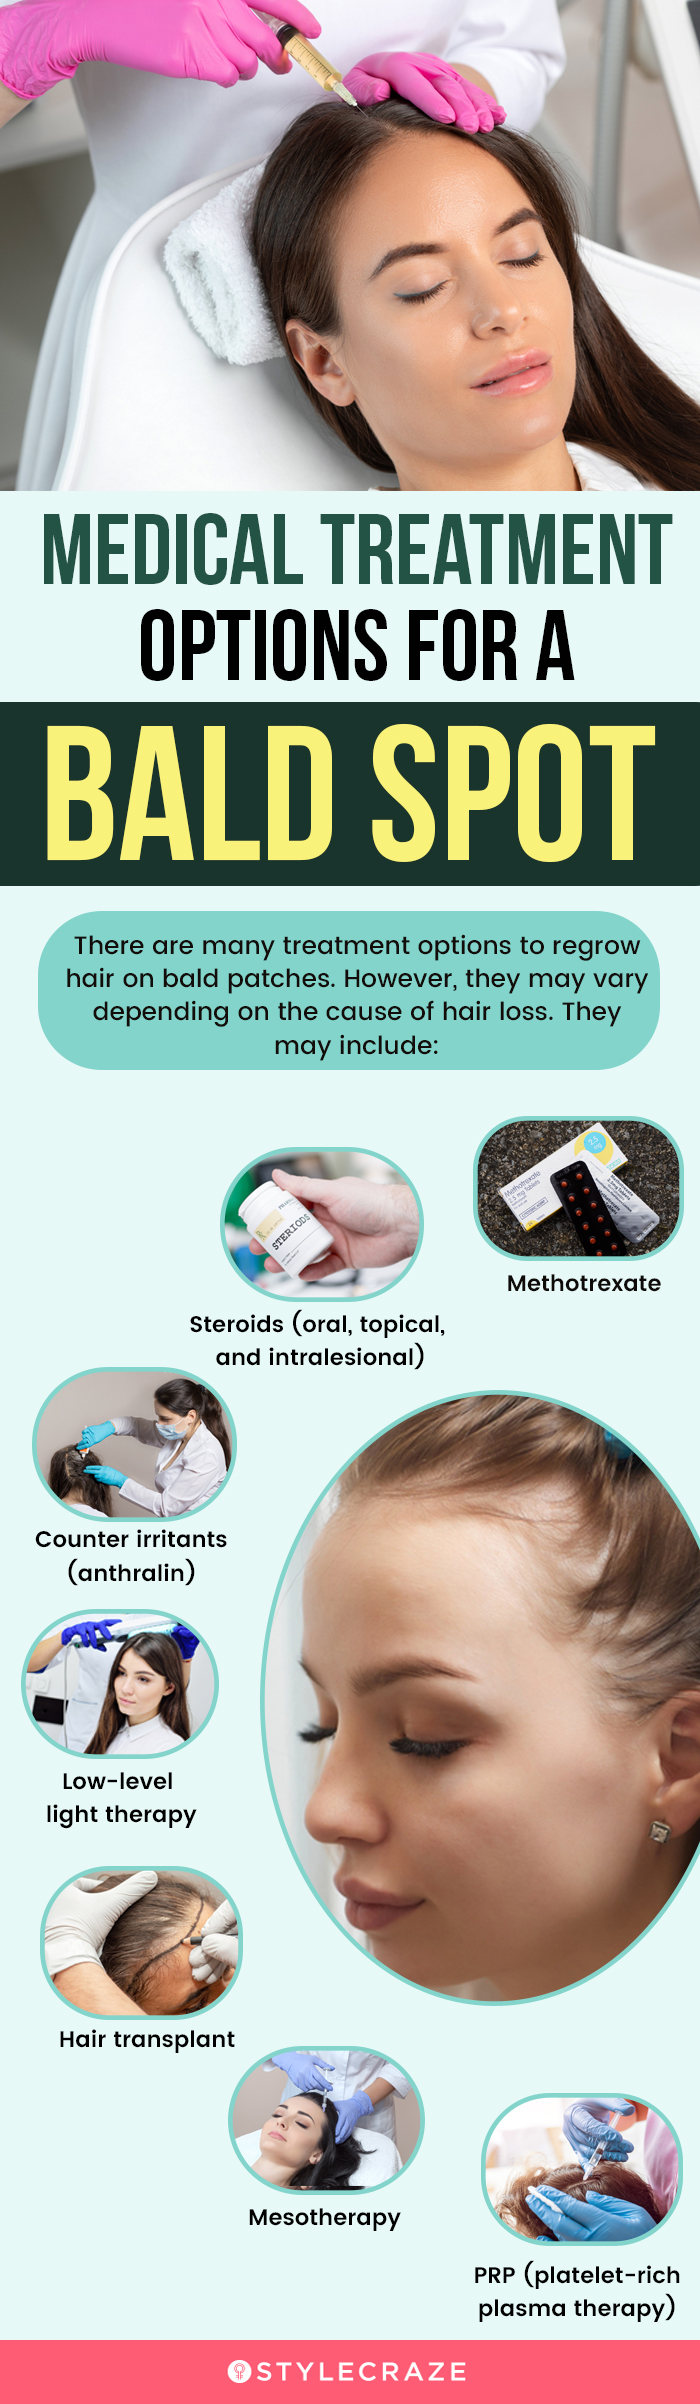 medial treatment options for a blad spot [infographic]